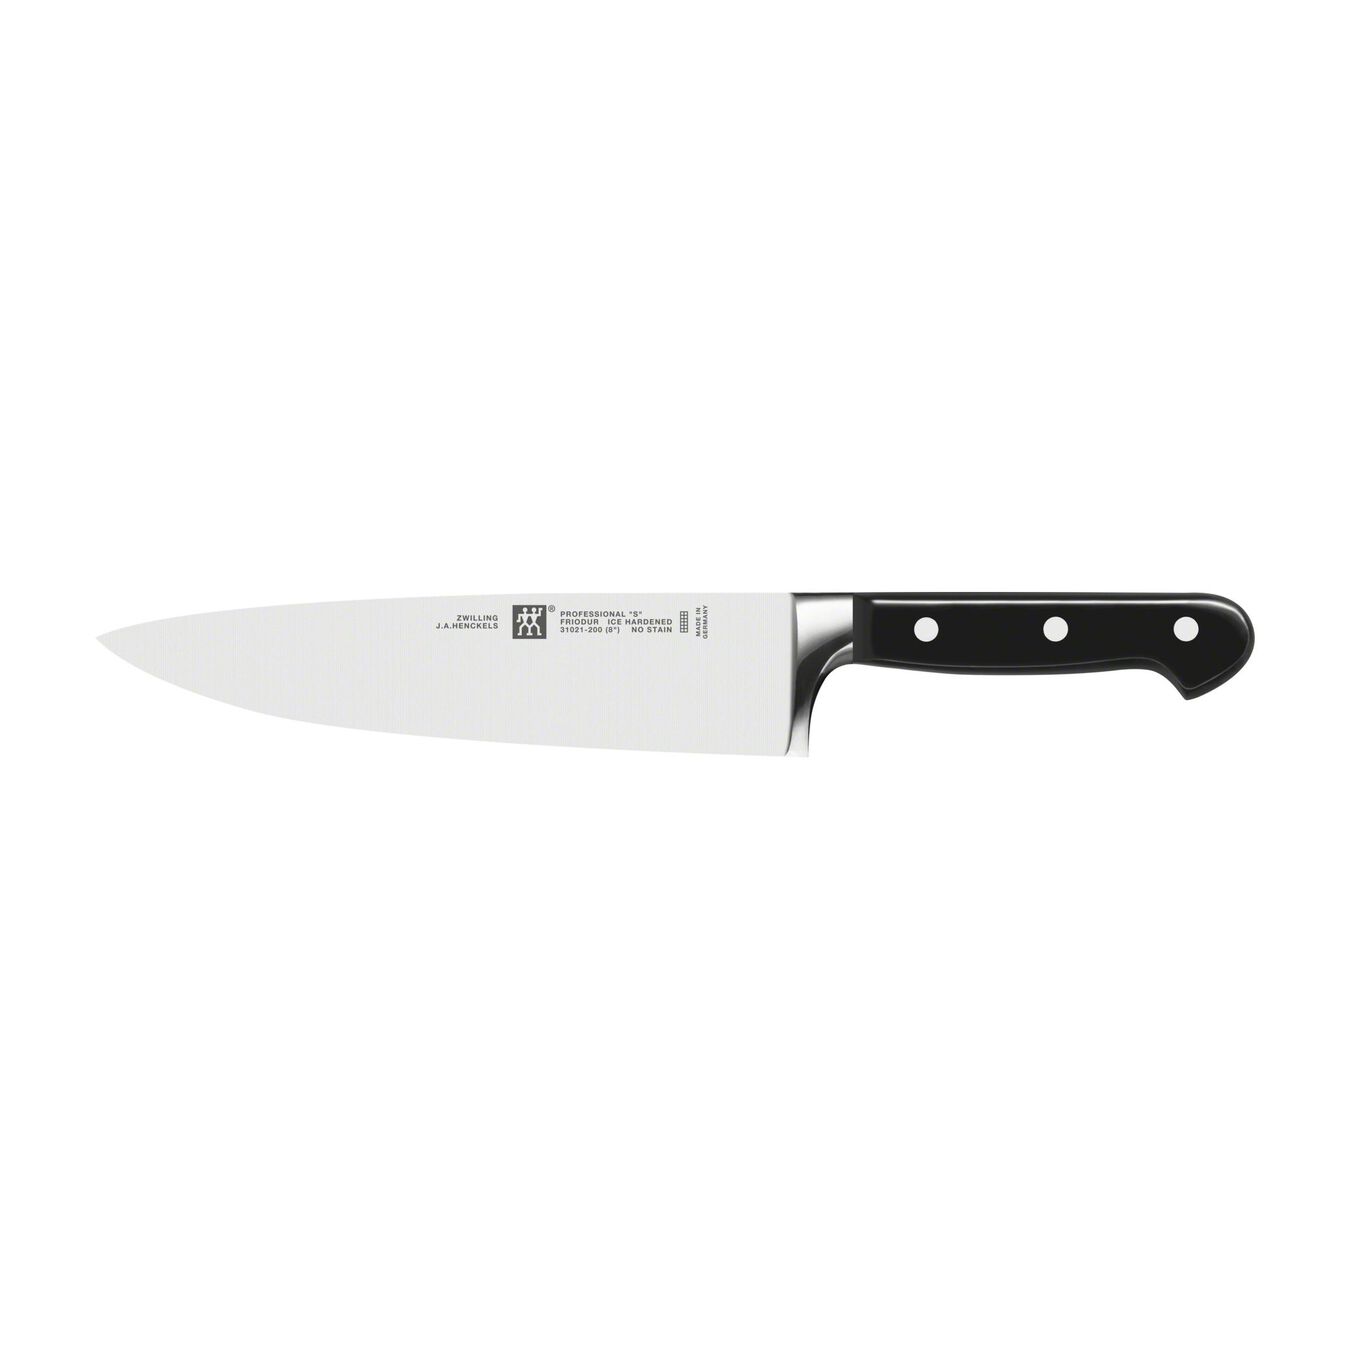 8 inch Chef's knife,,large 5